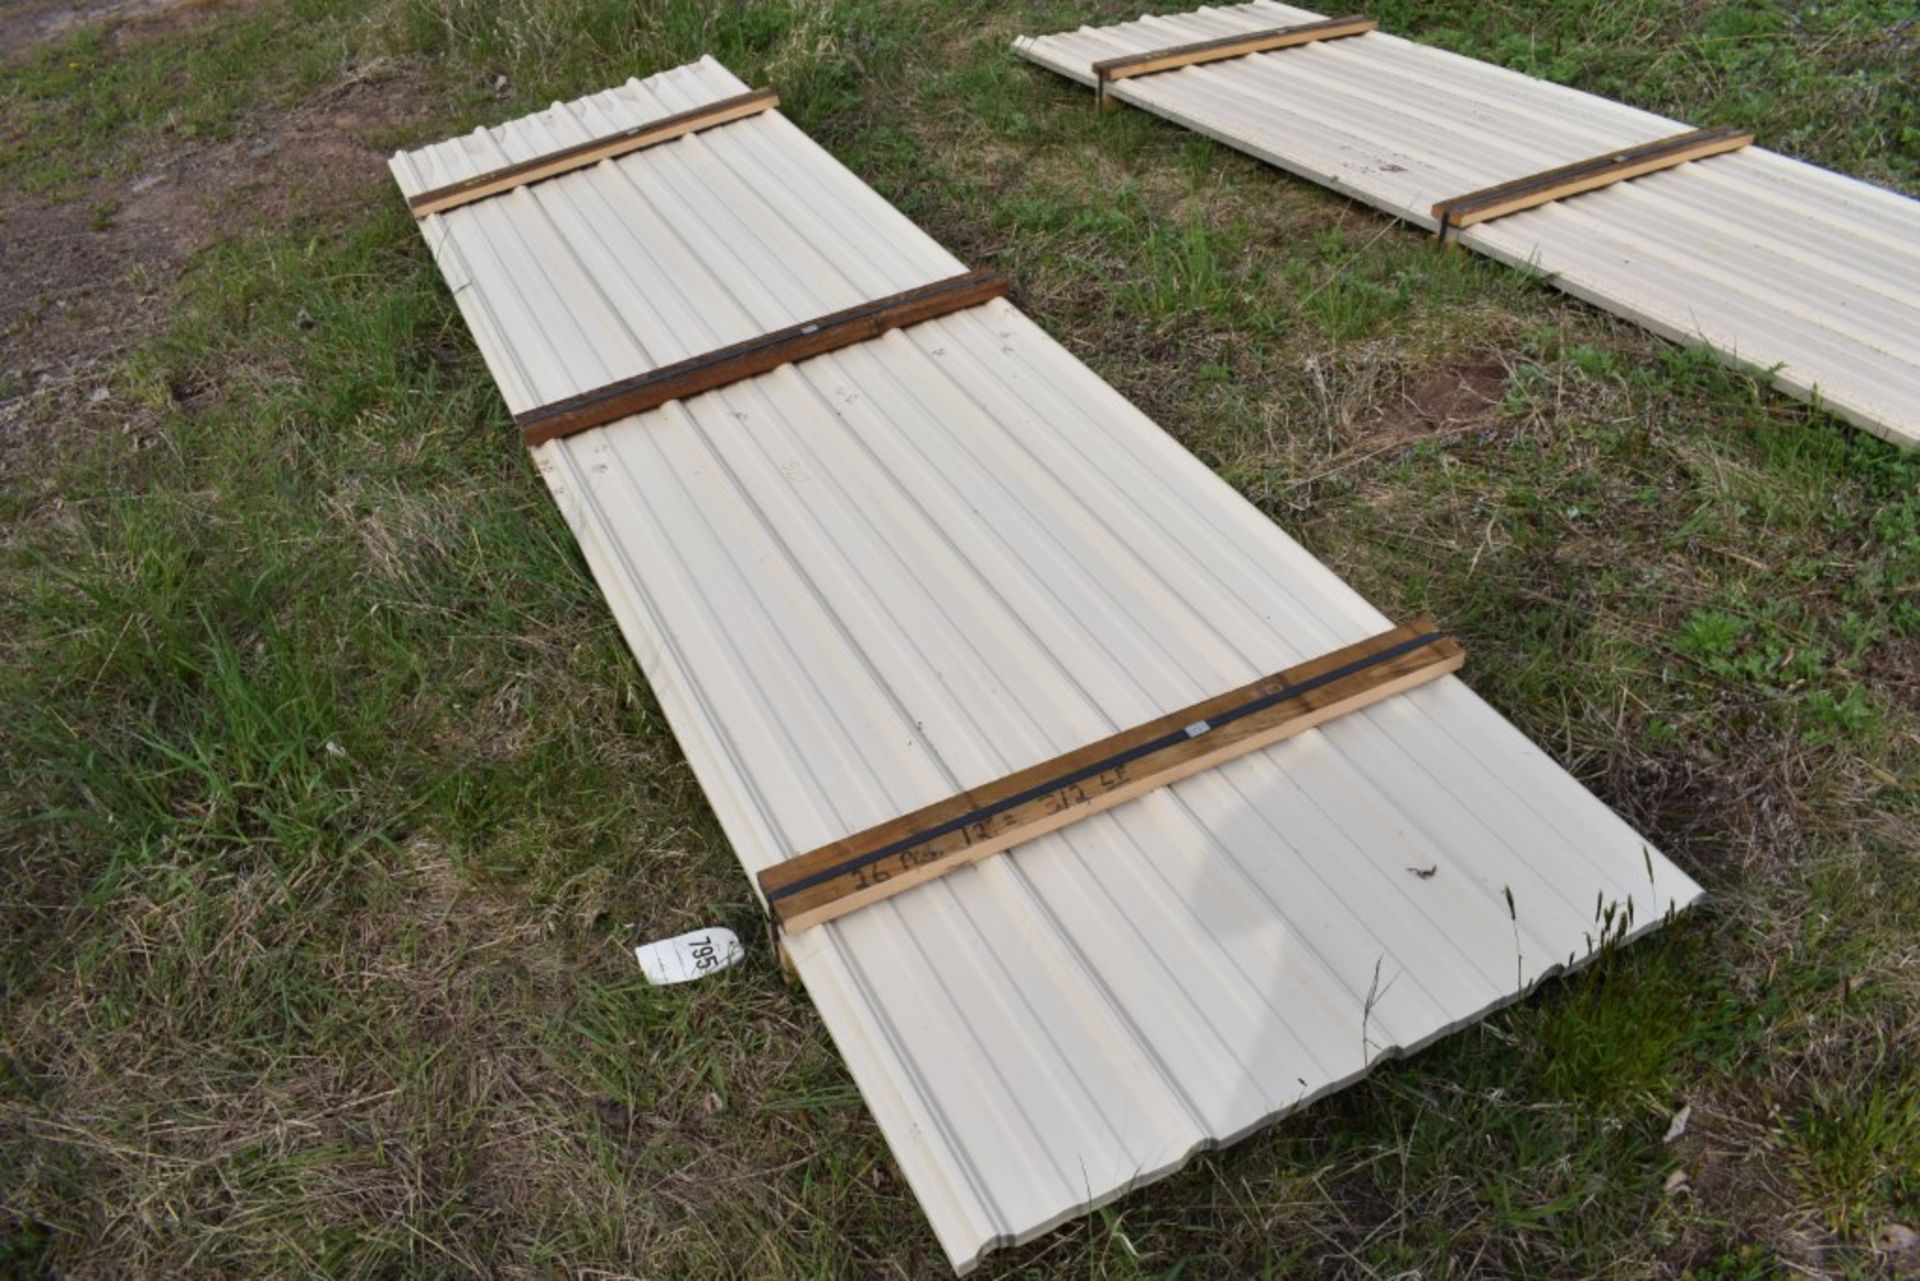 26 Pieces of 12' Sections of Cream Corrugated Metal Paneling SOLD TIMES THE LINEAR FOOT